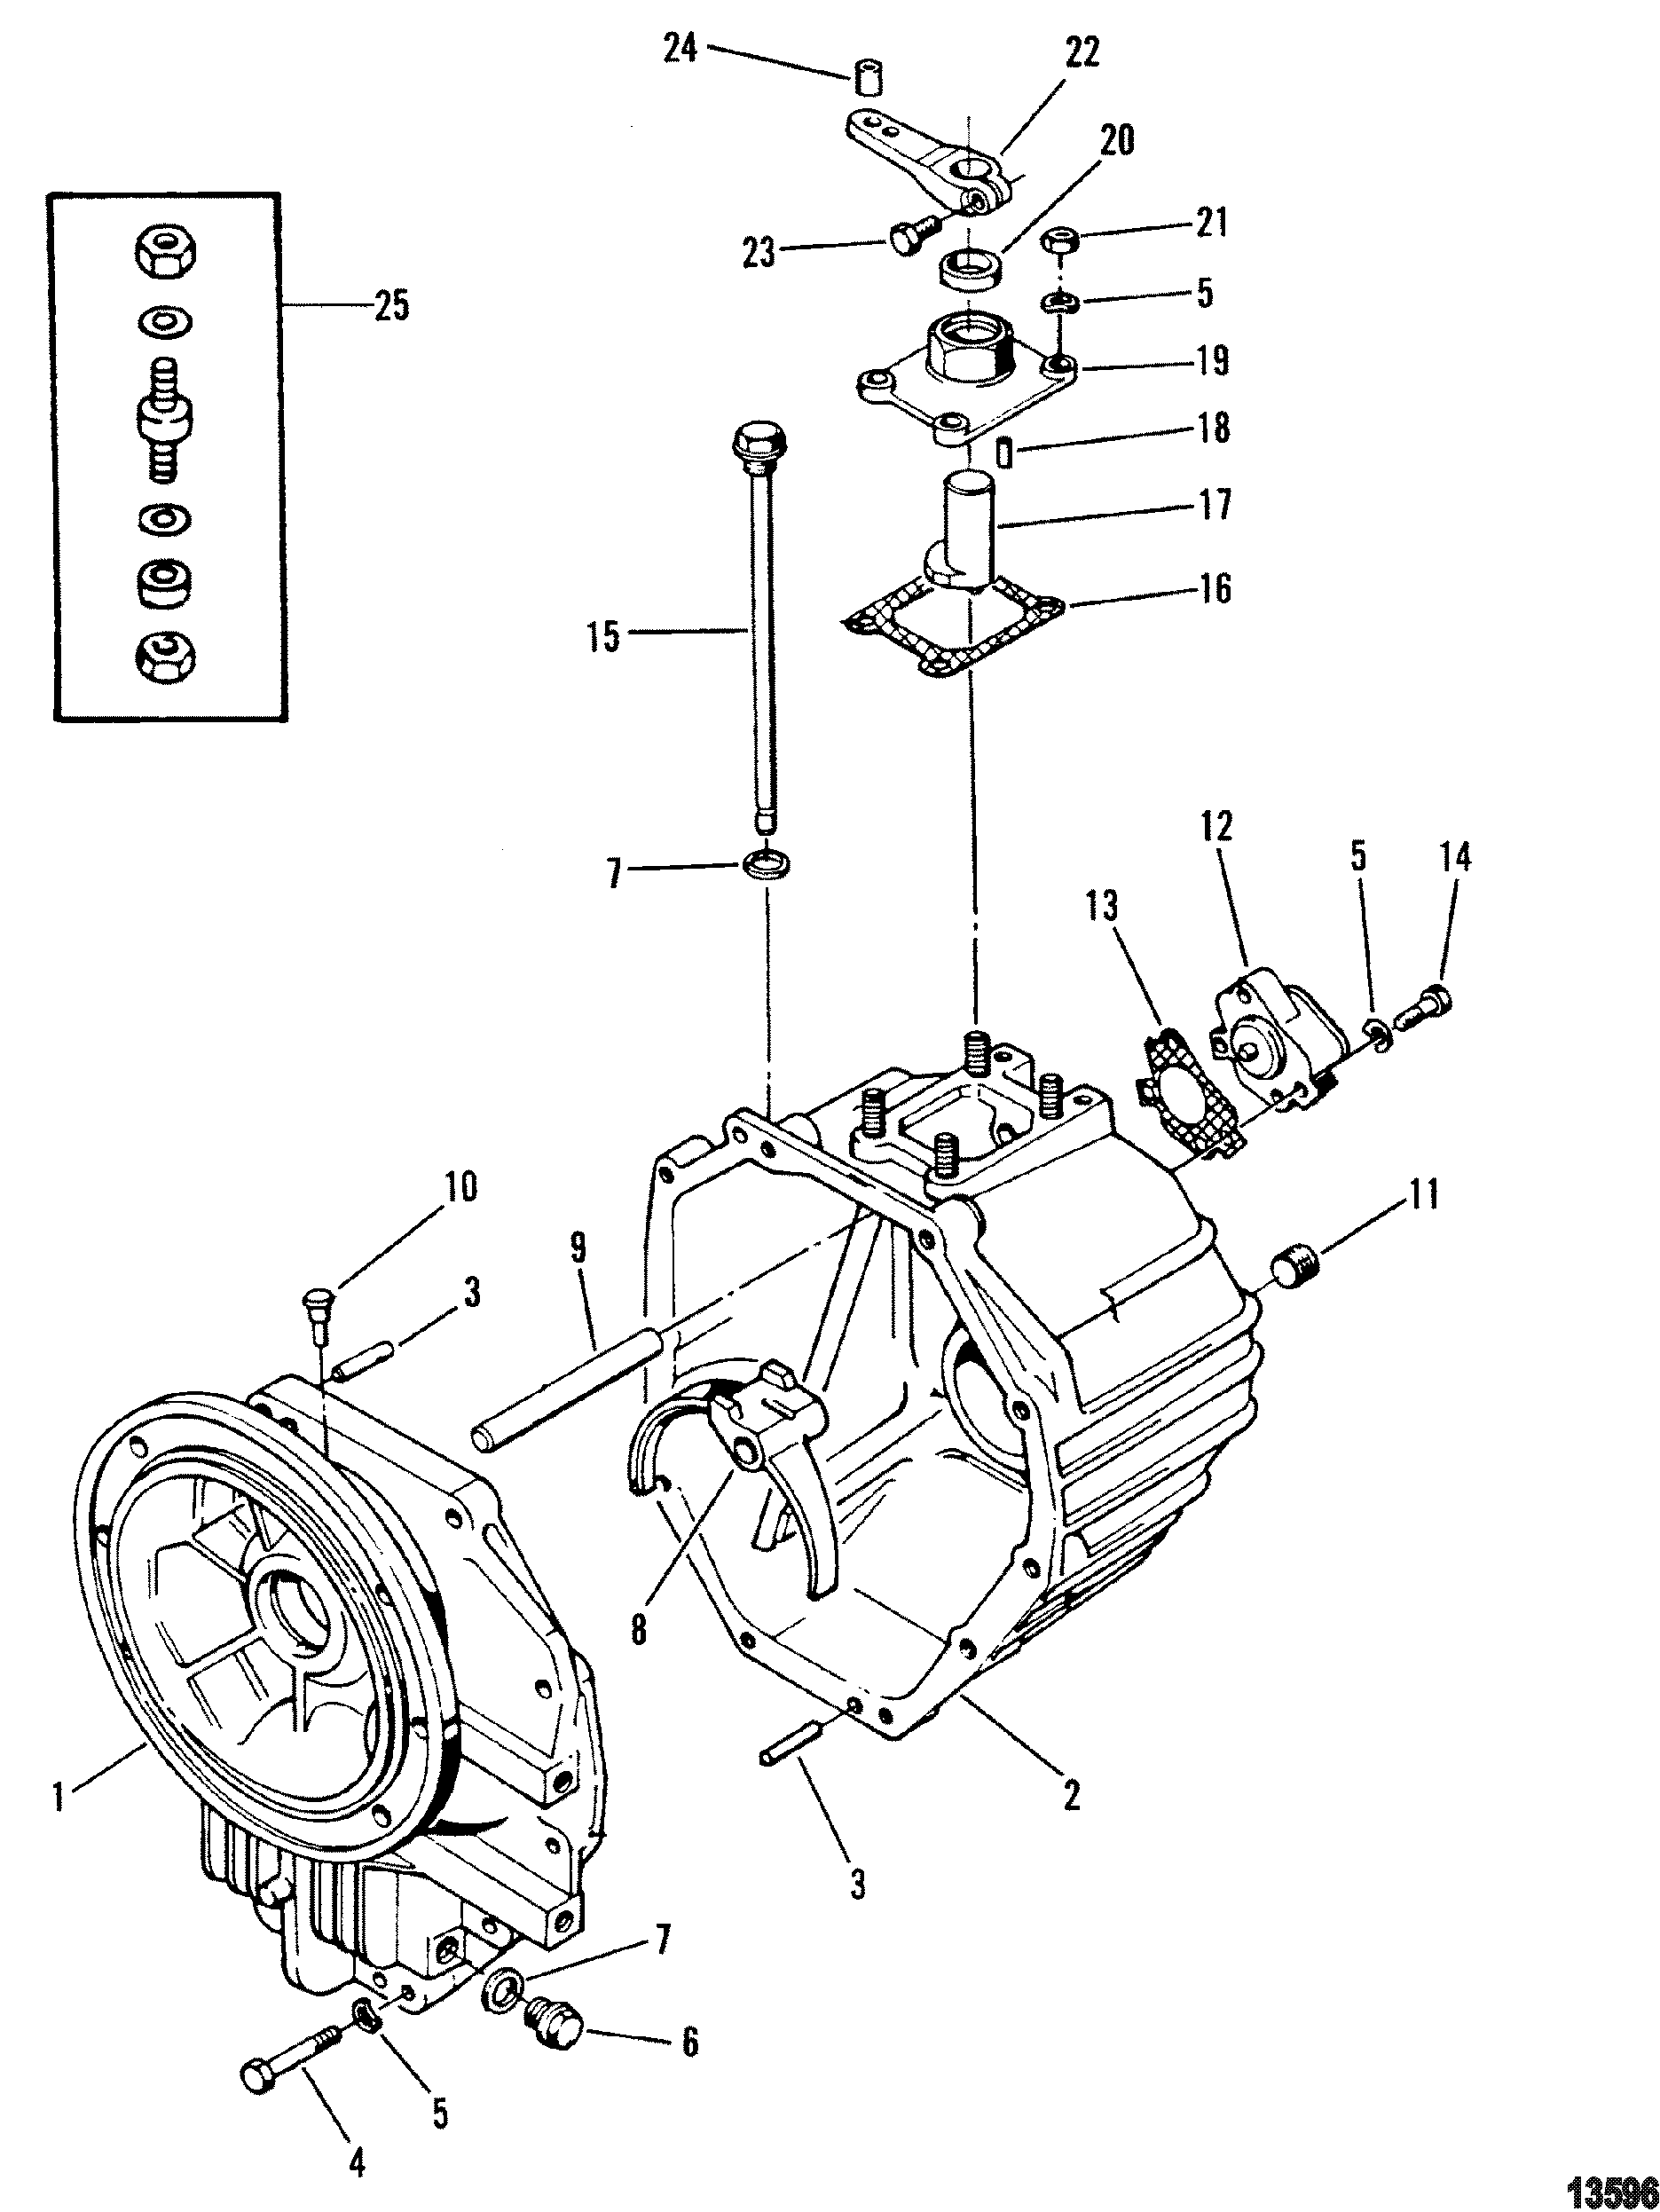 Transmission(Inline) (Outer Housing)